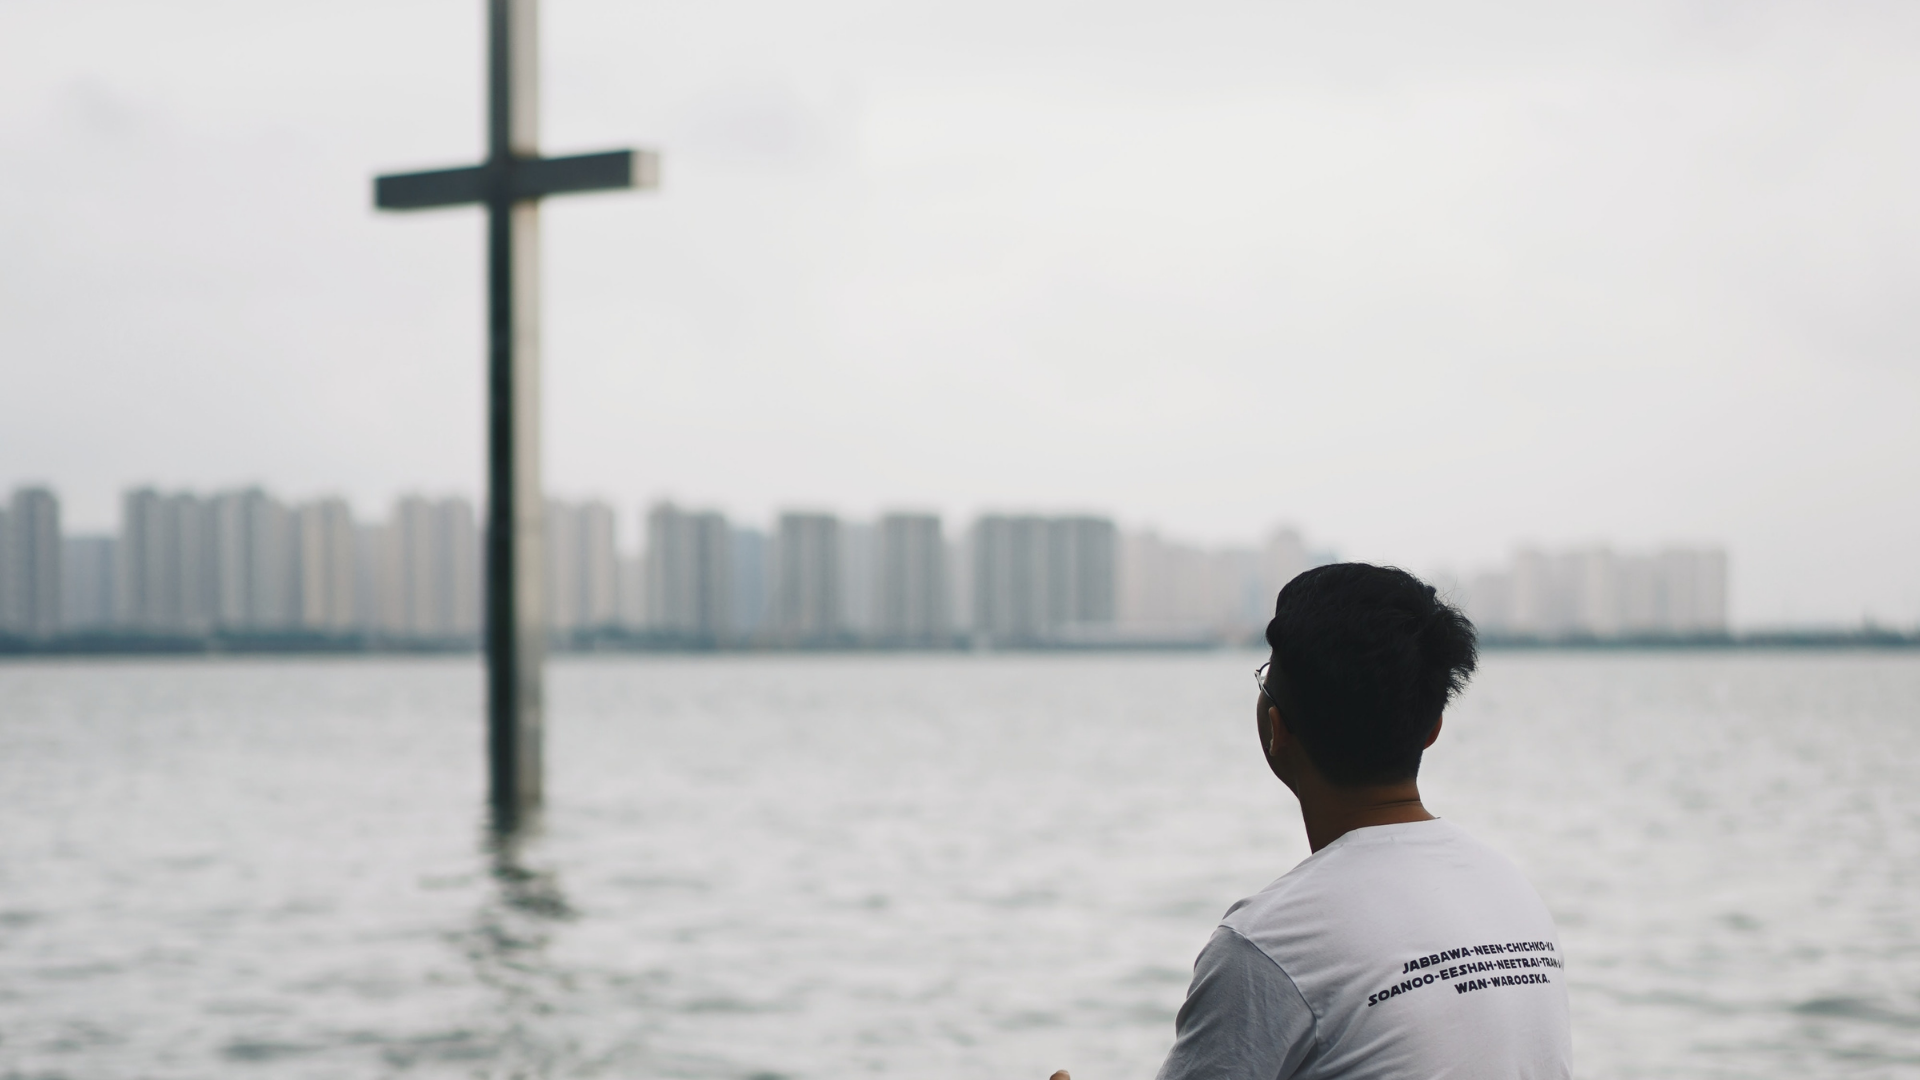 man with black hair with his back to the camera as he looks out at a cross placed in a river with a city skyline in the background